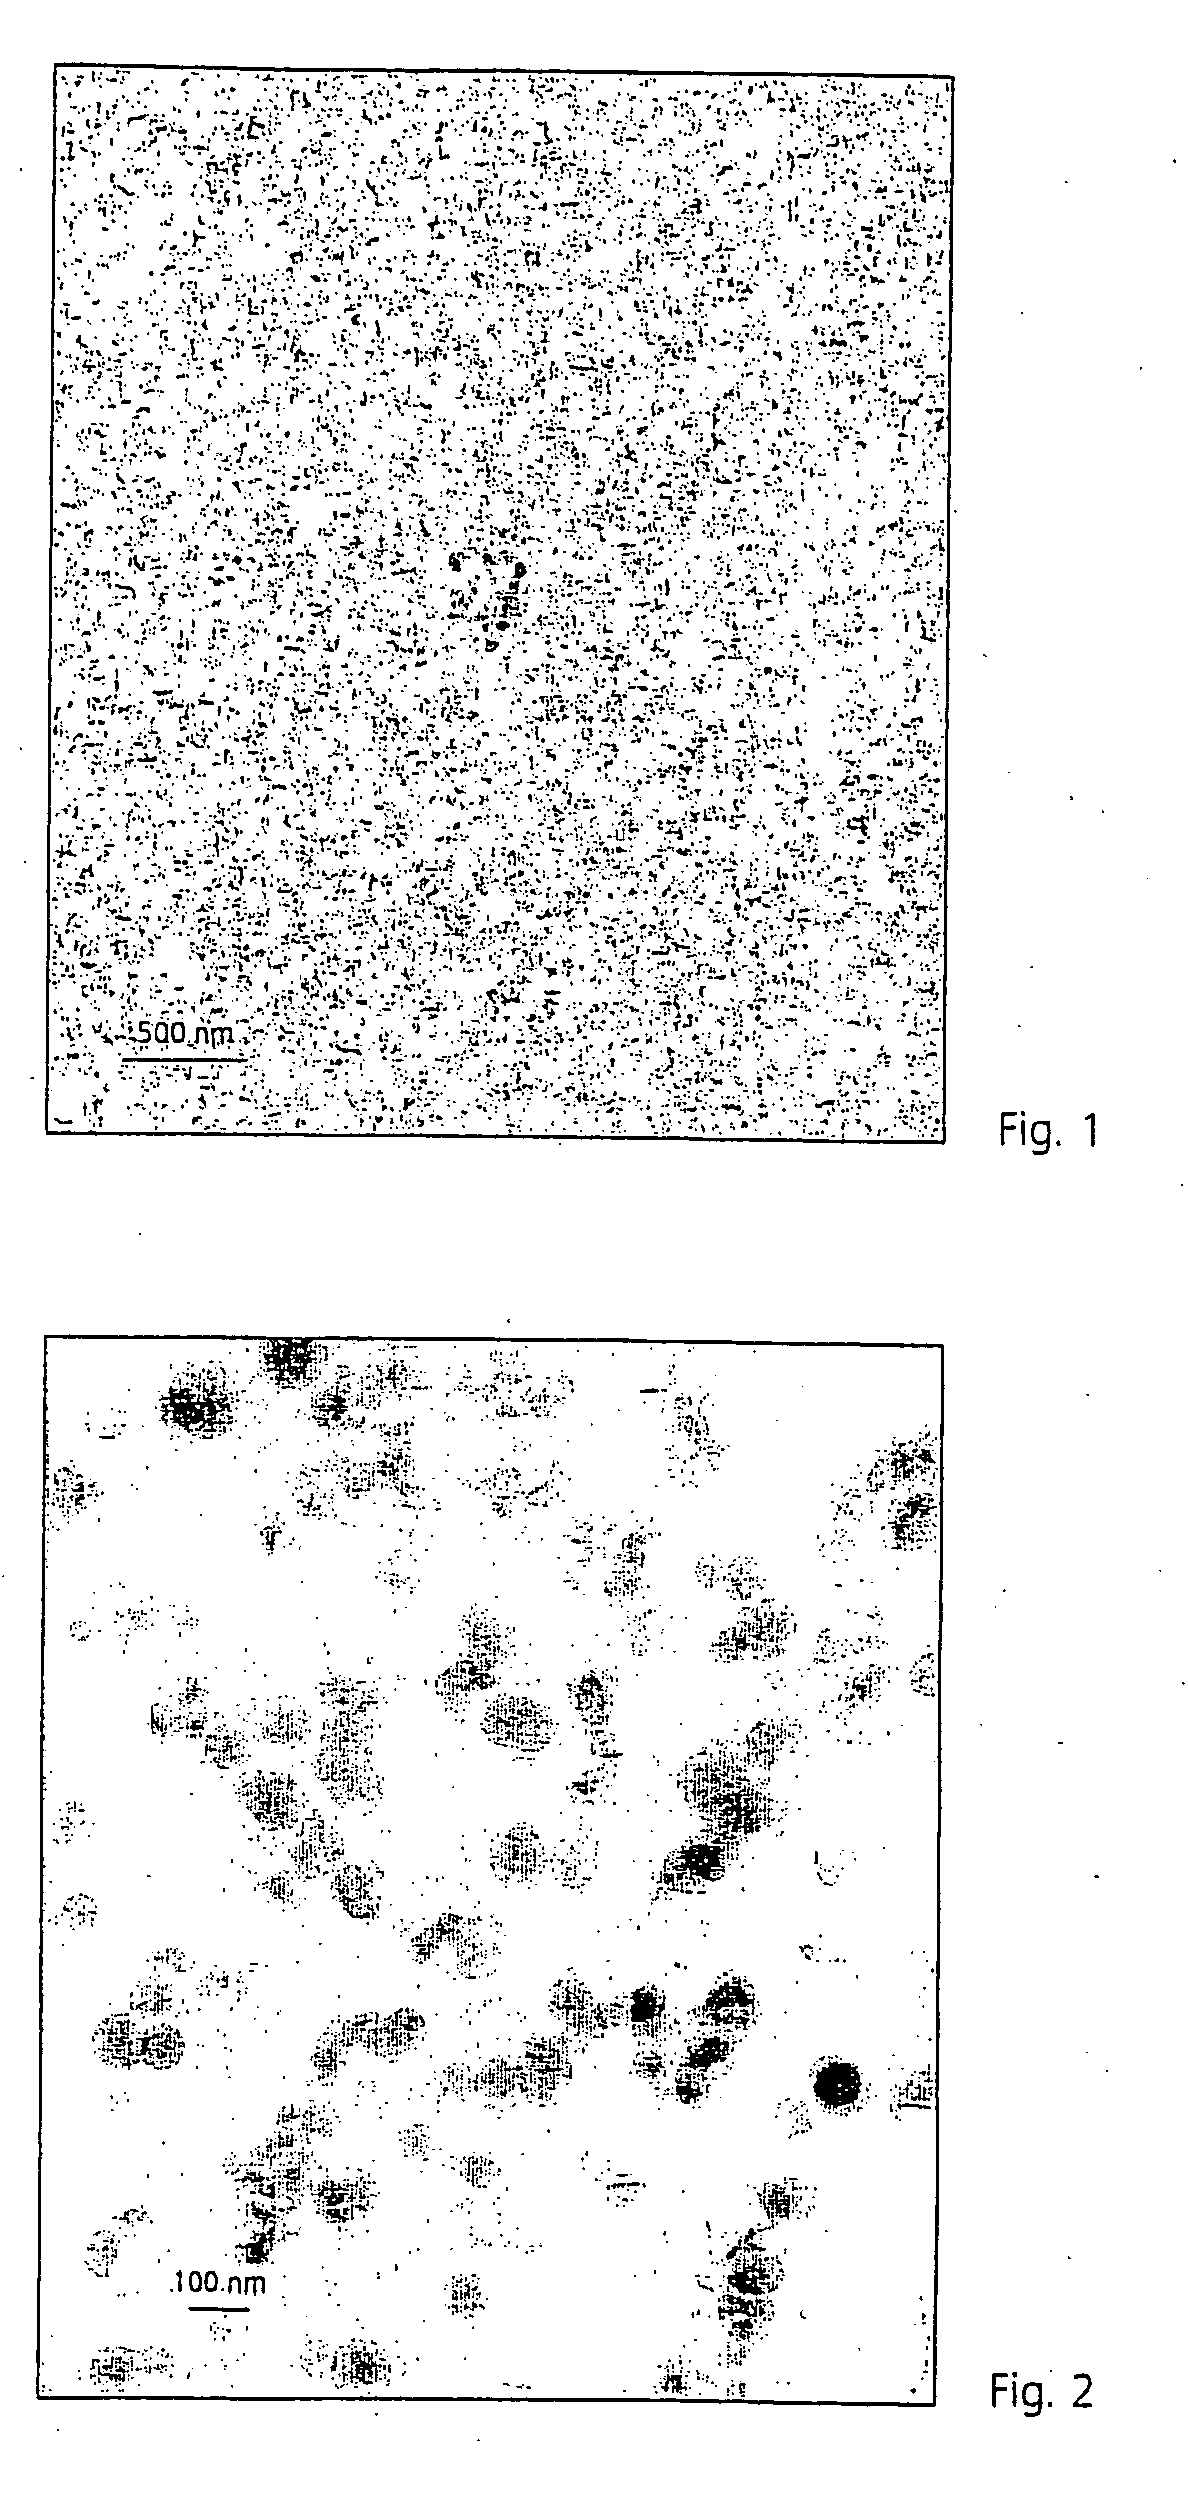 Nanocomposites, method of production, and method of use